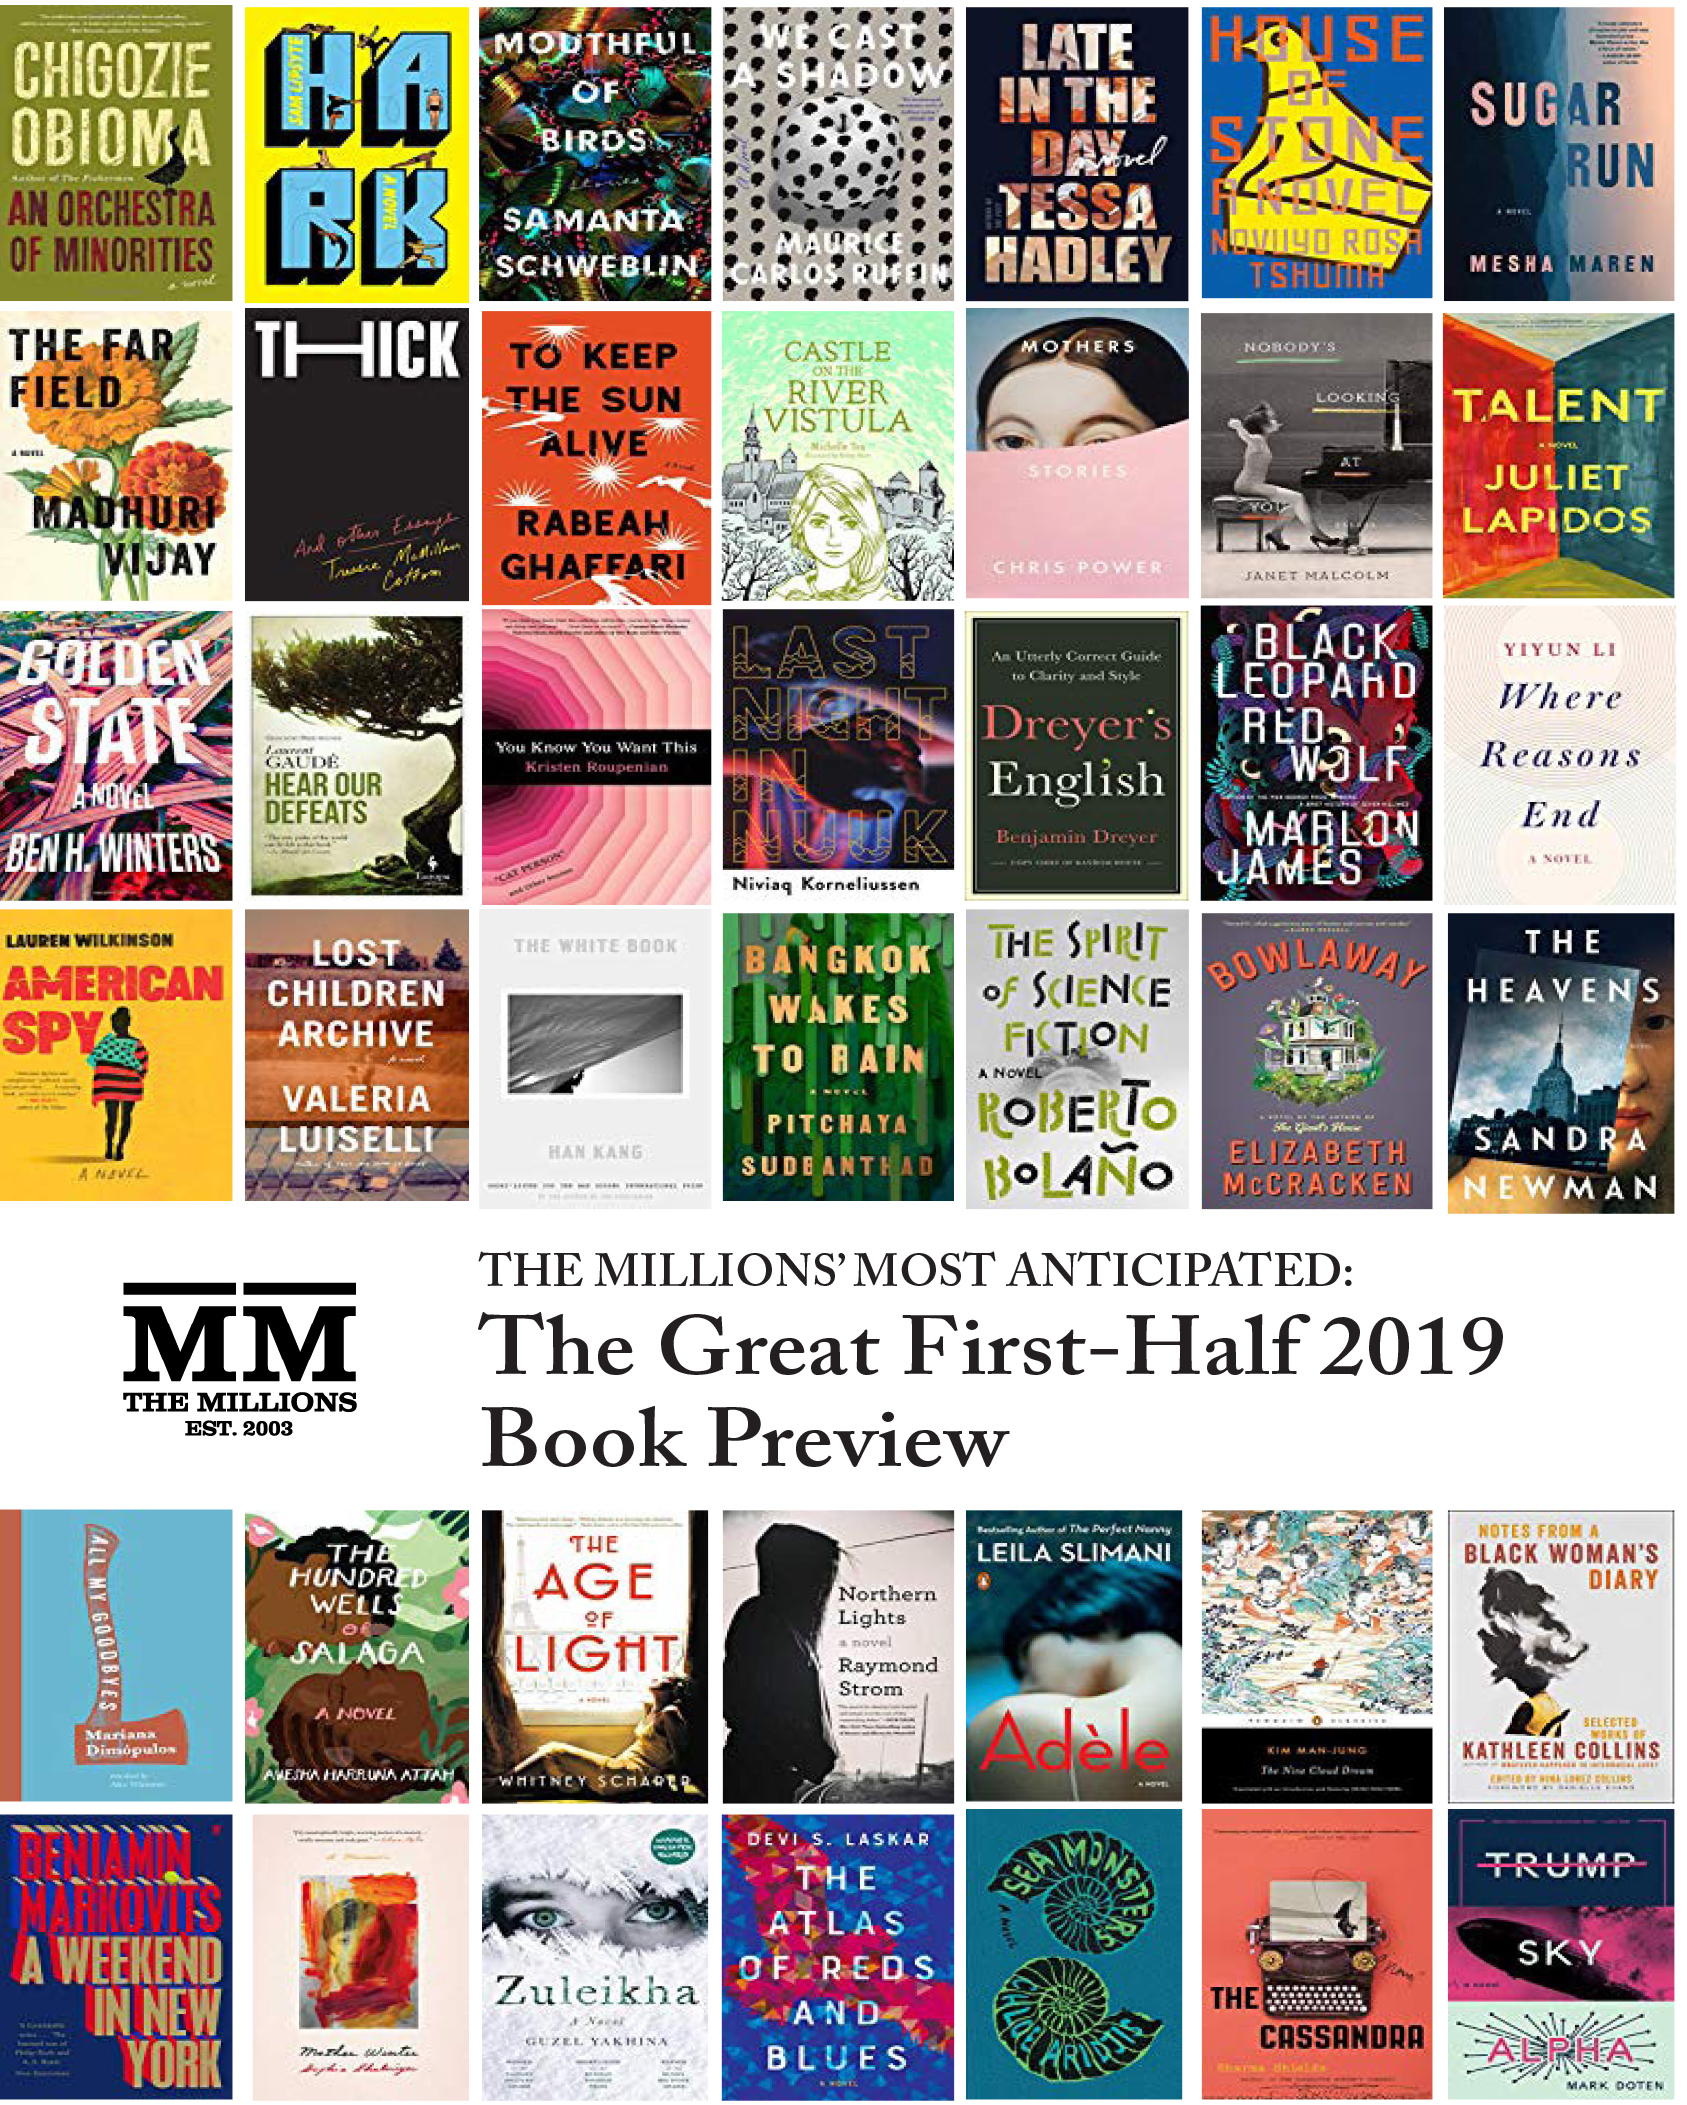 First-Half 2019 Book Preview